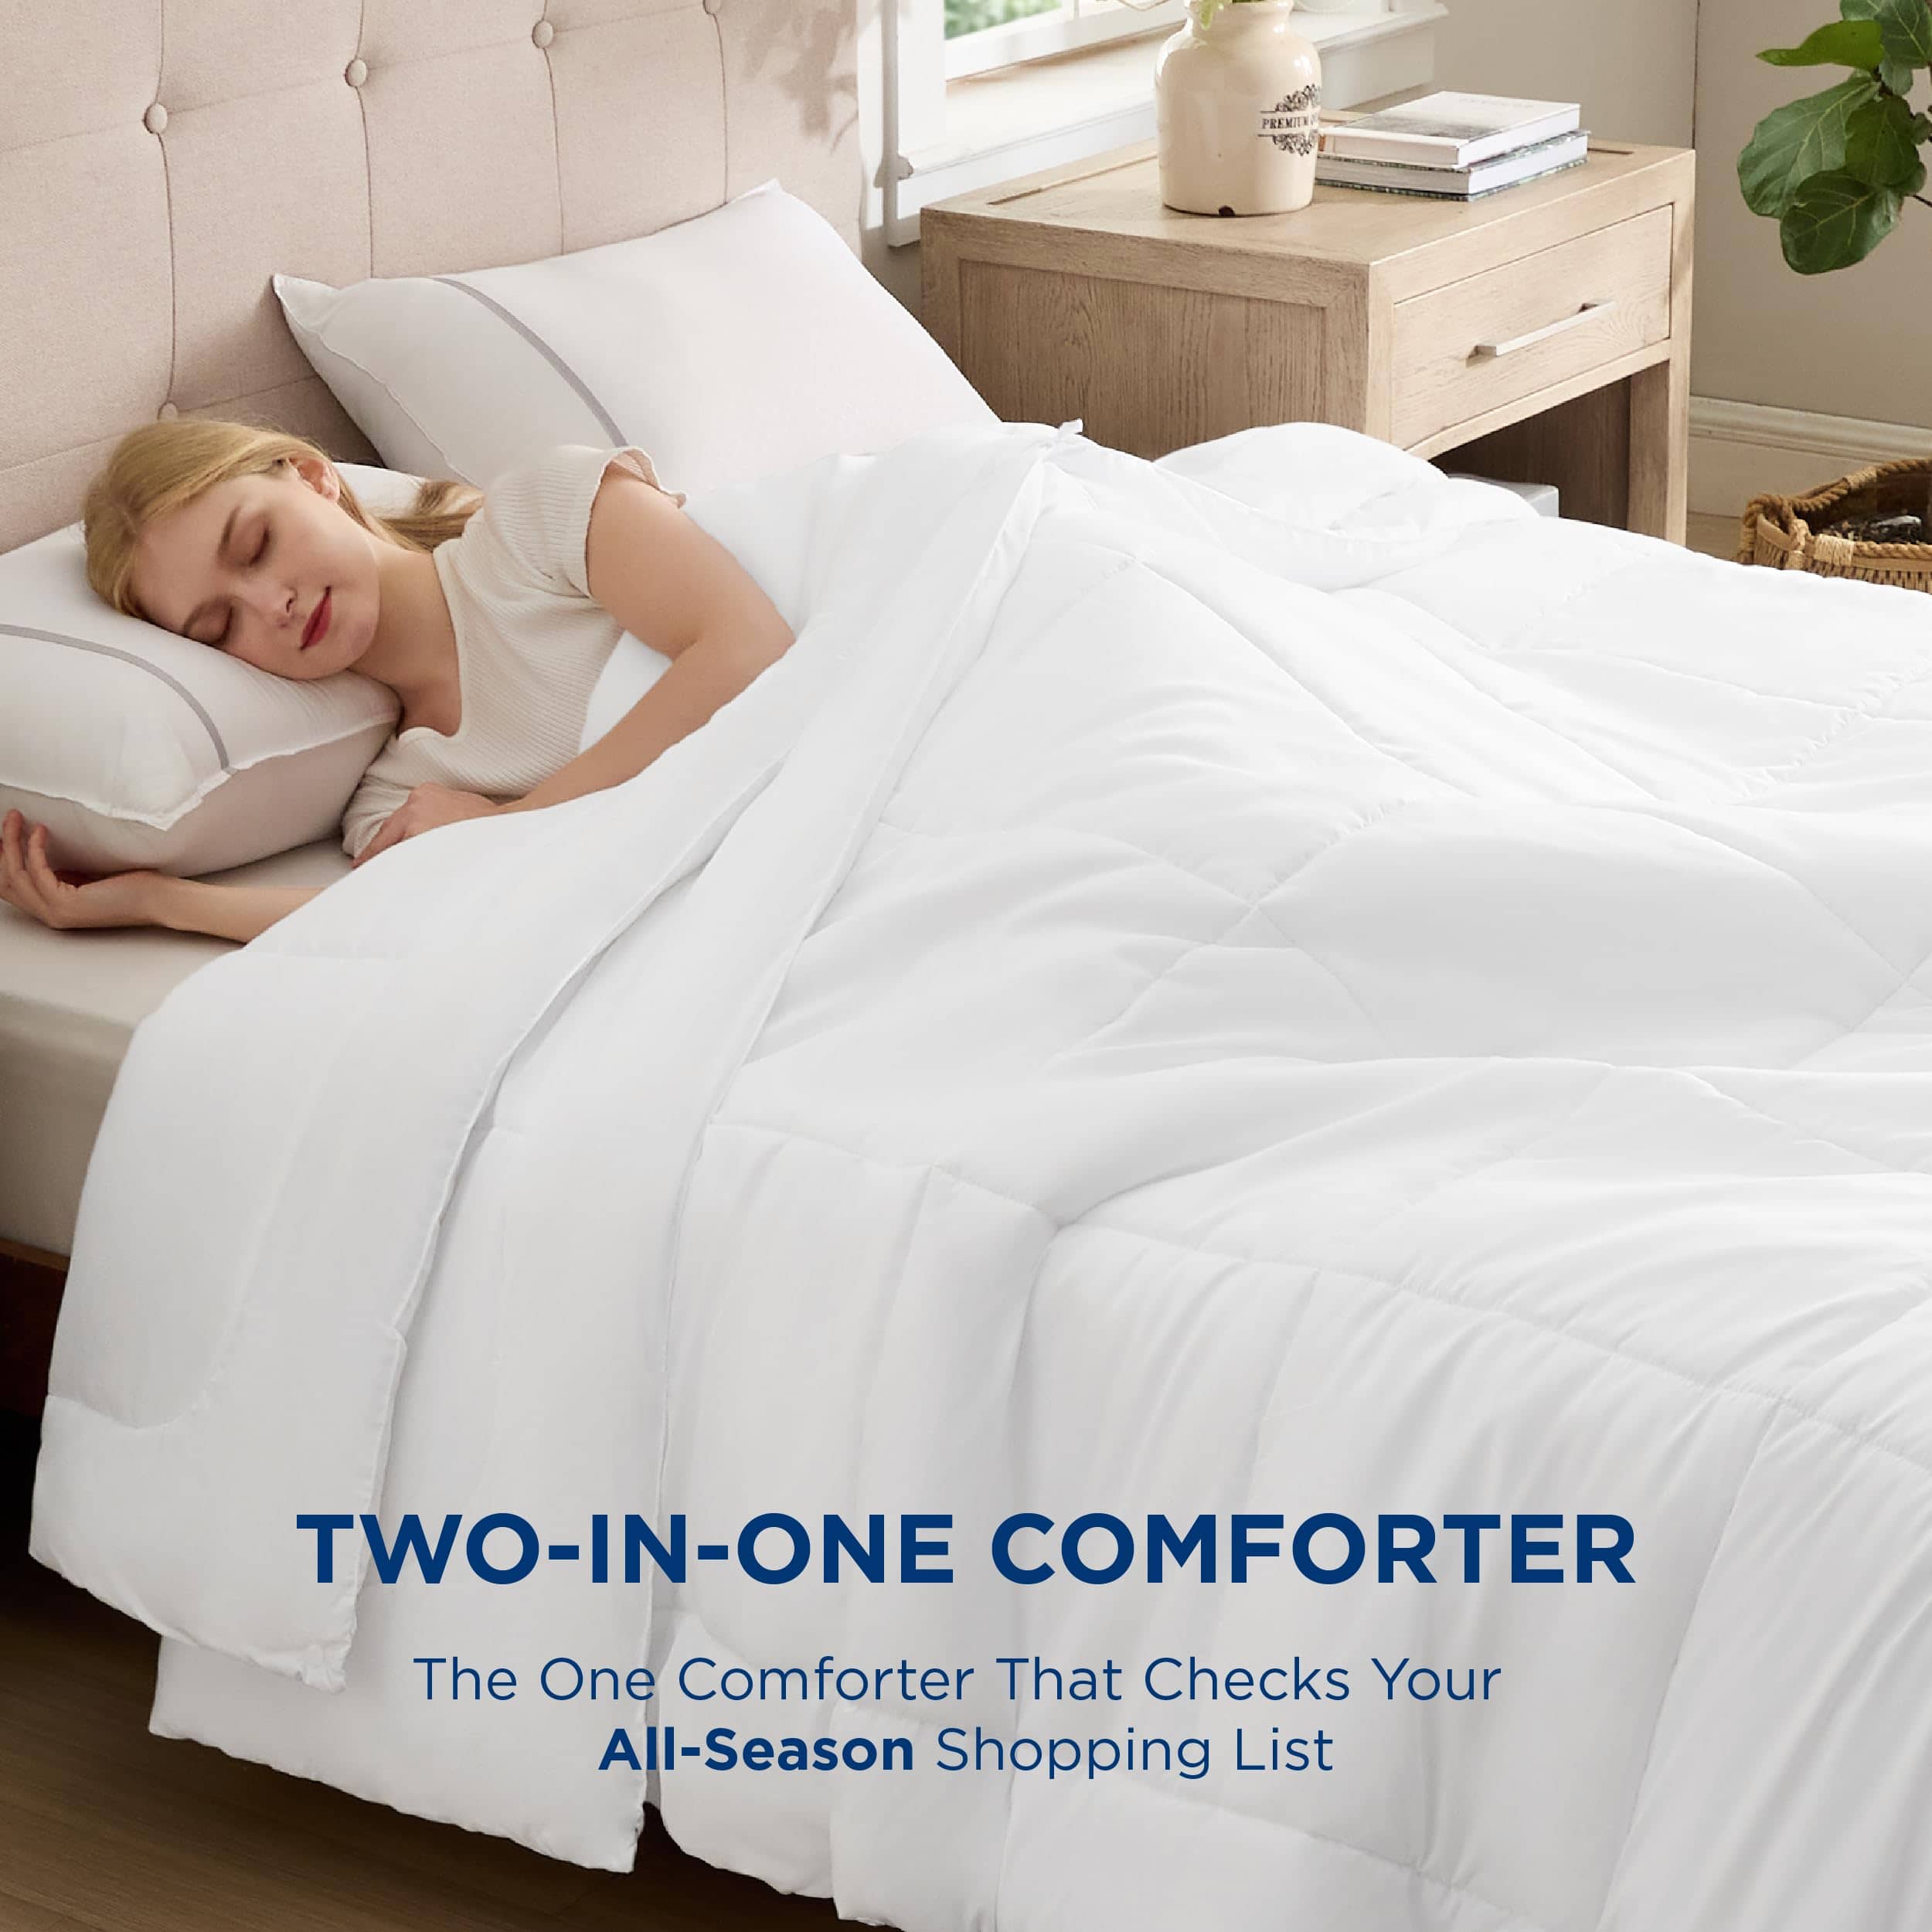 Duvet Inserts two in one Comforter